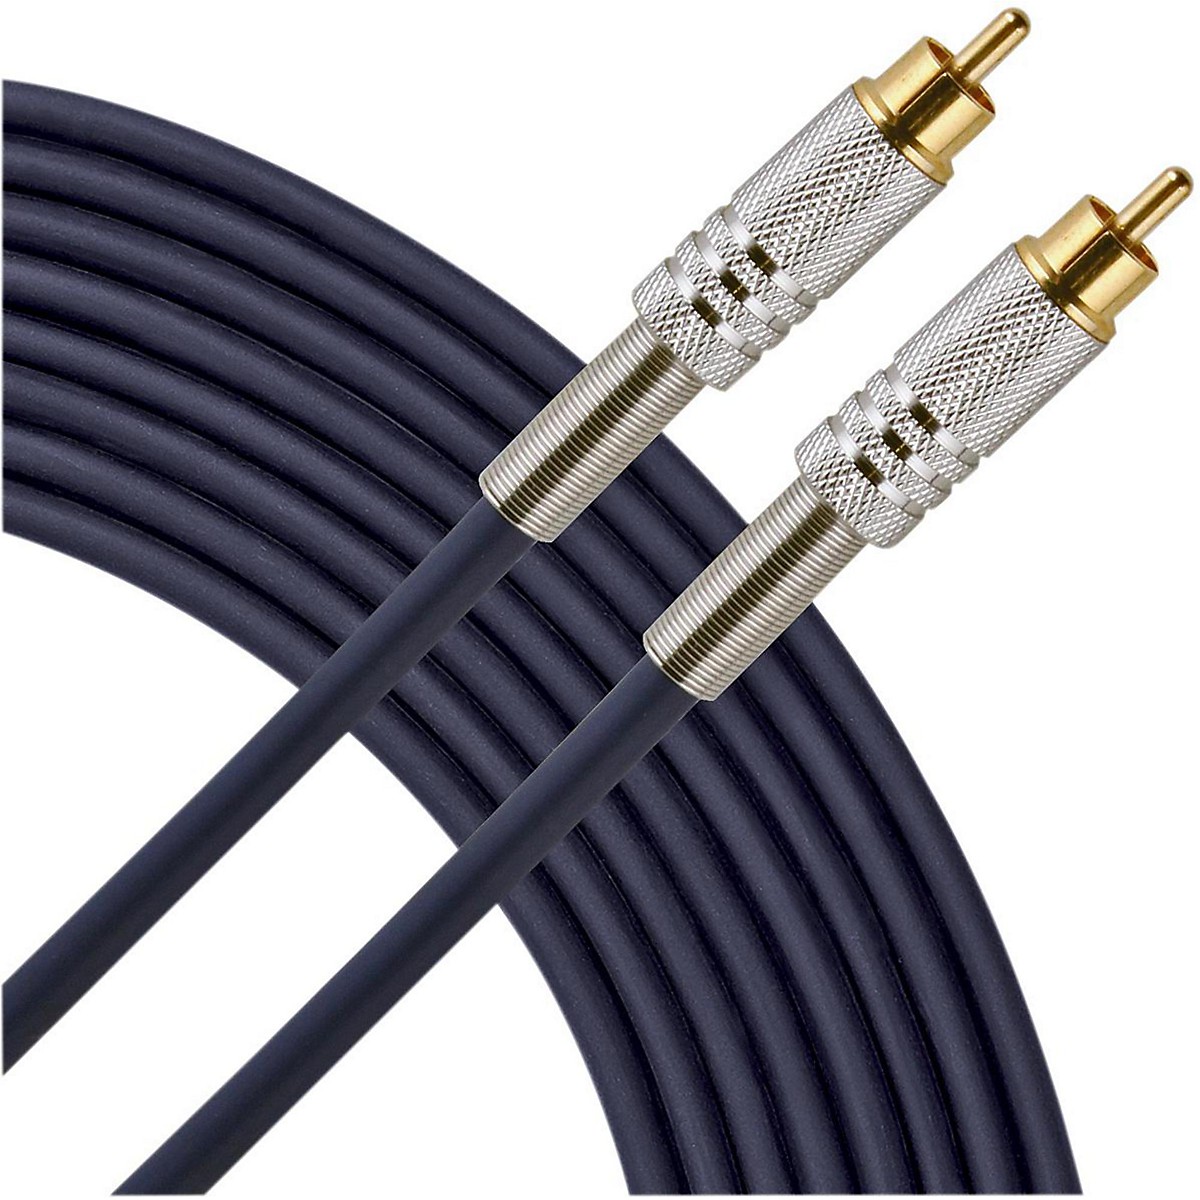 Livewire S/PDIF RCA Data Cable 1 m